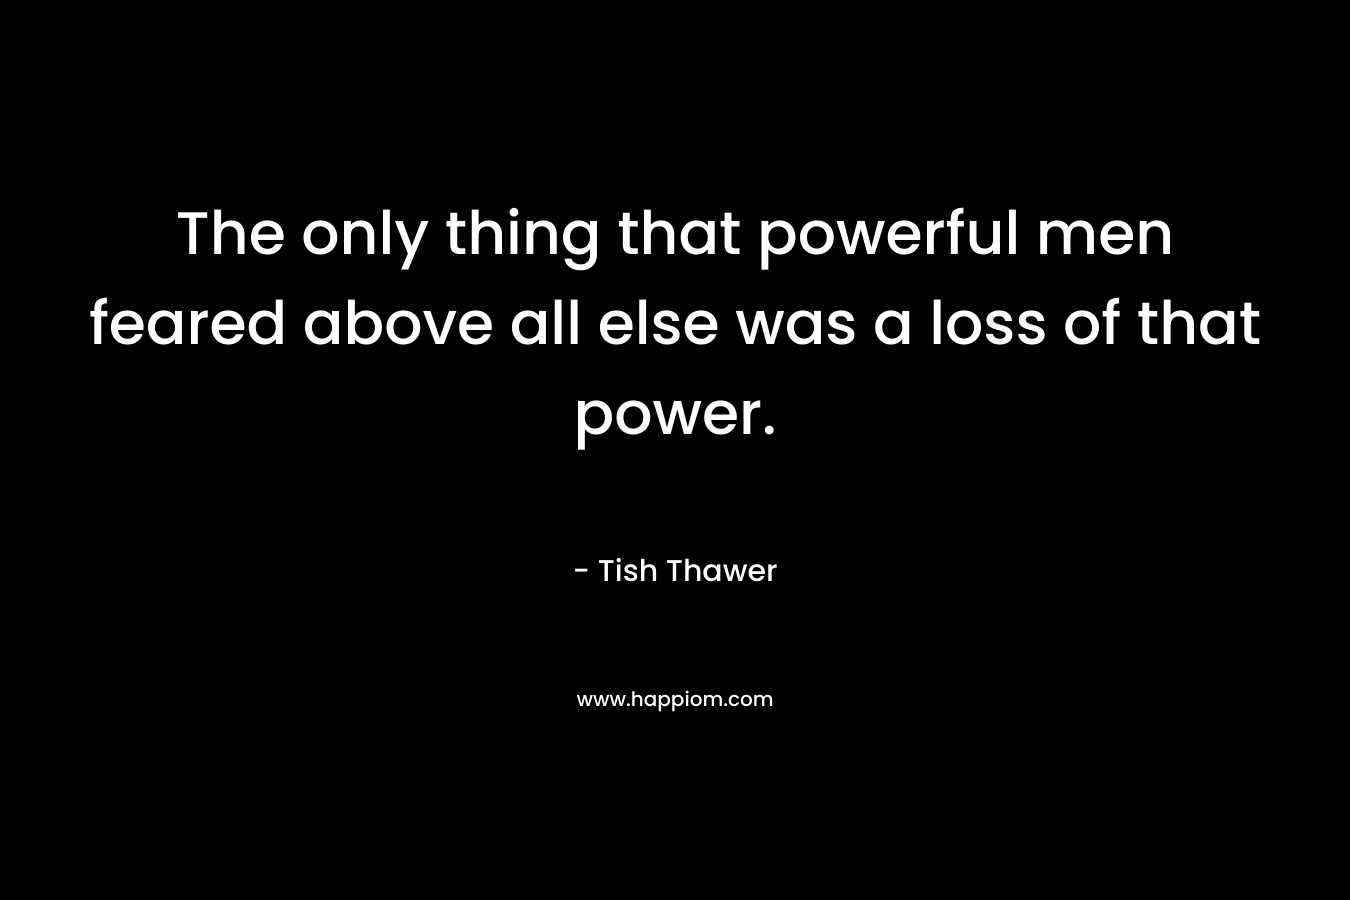 The only thing that powerful men feared above all else was a loss of that power. – Tish Thawer